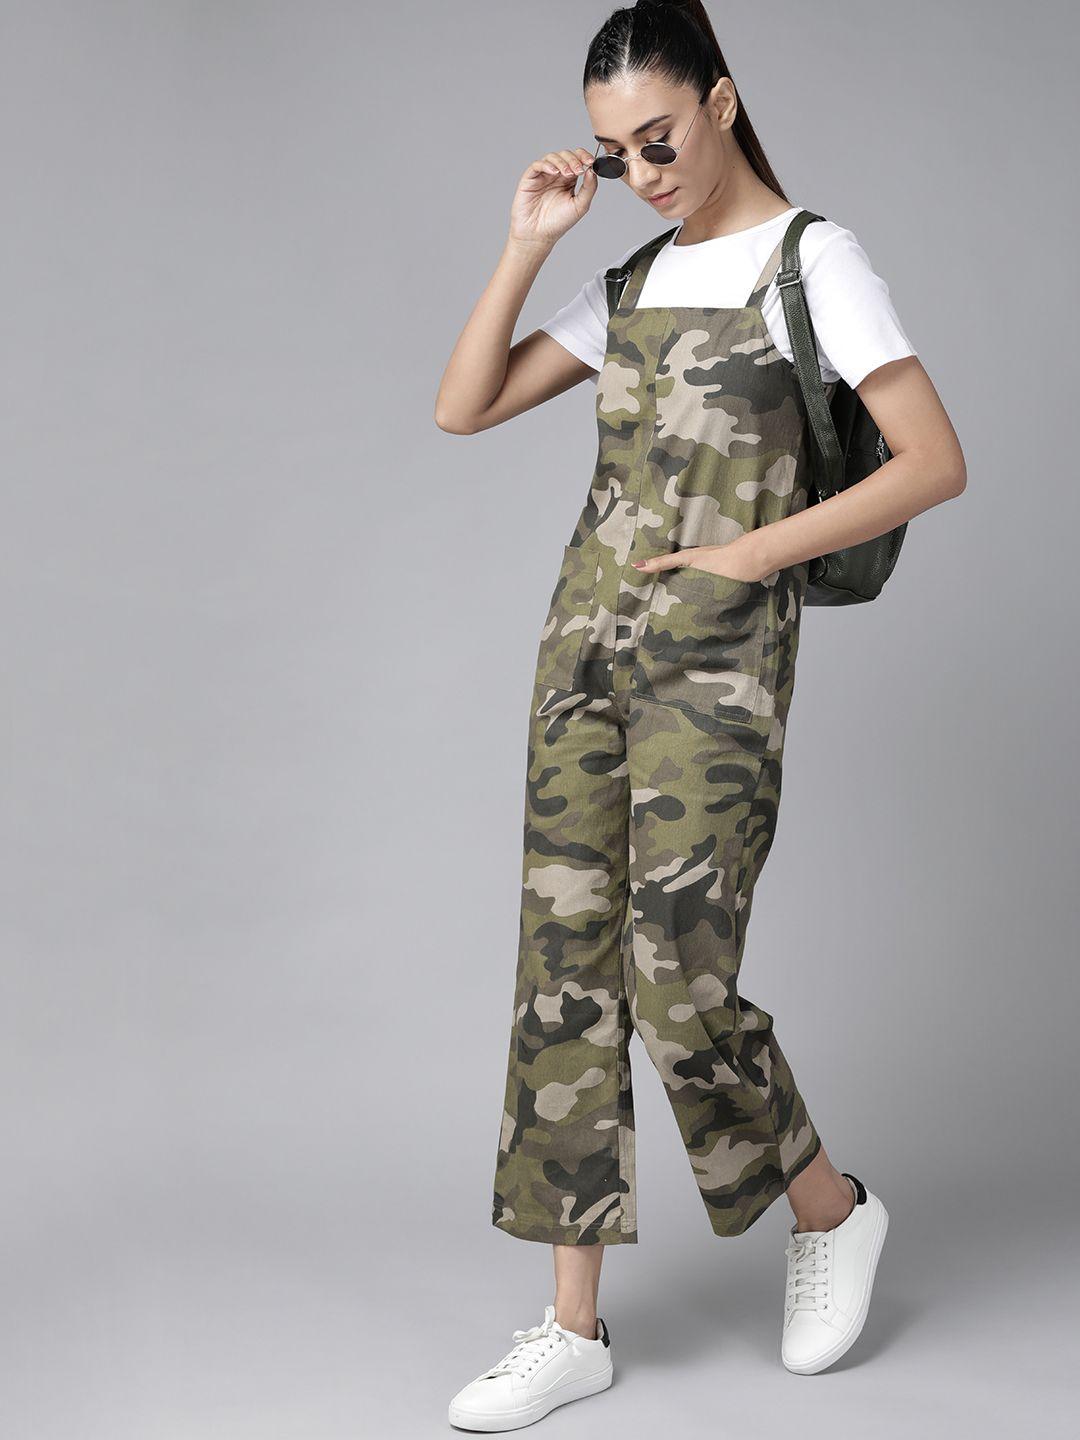 roadster-women-olive-green-&-beige-camouflage-print-pure-cotton-dungarees